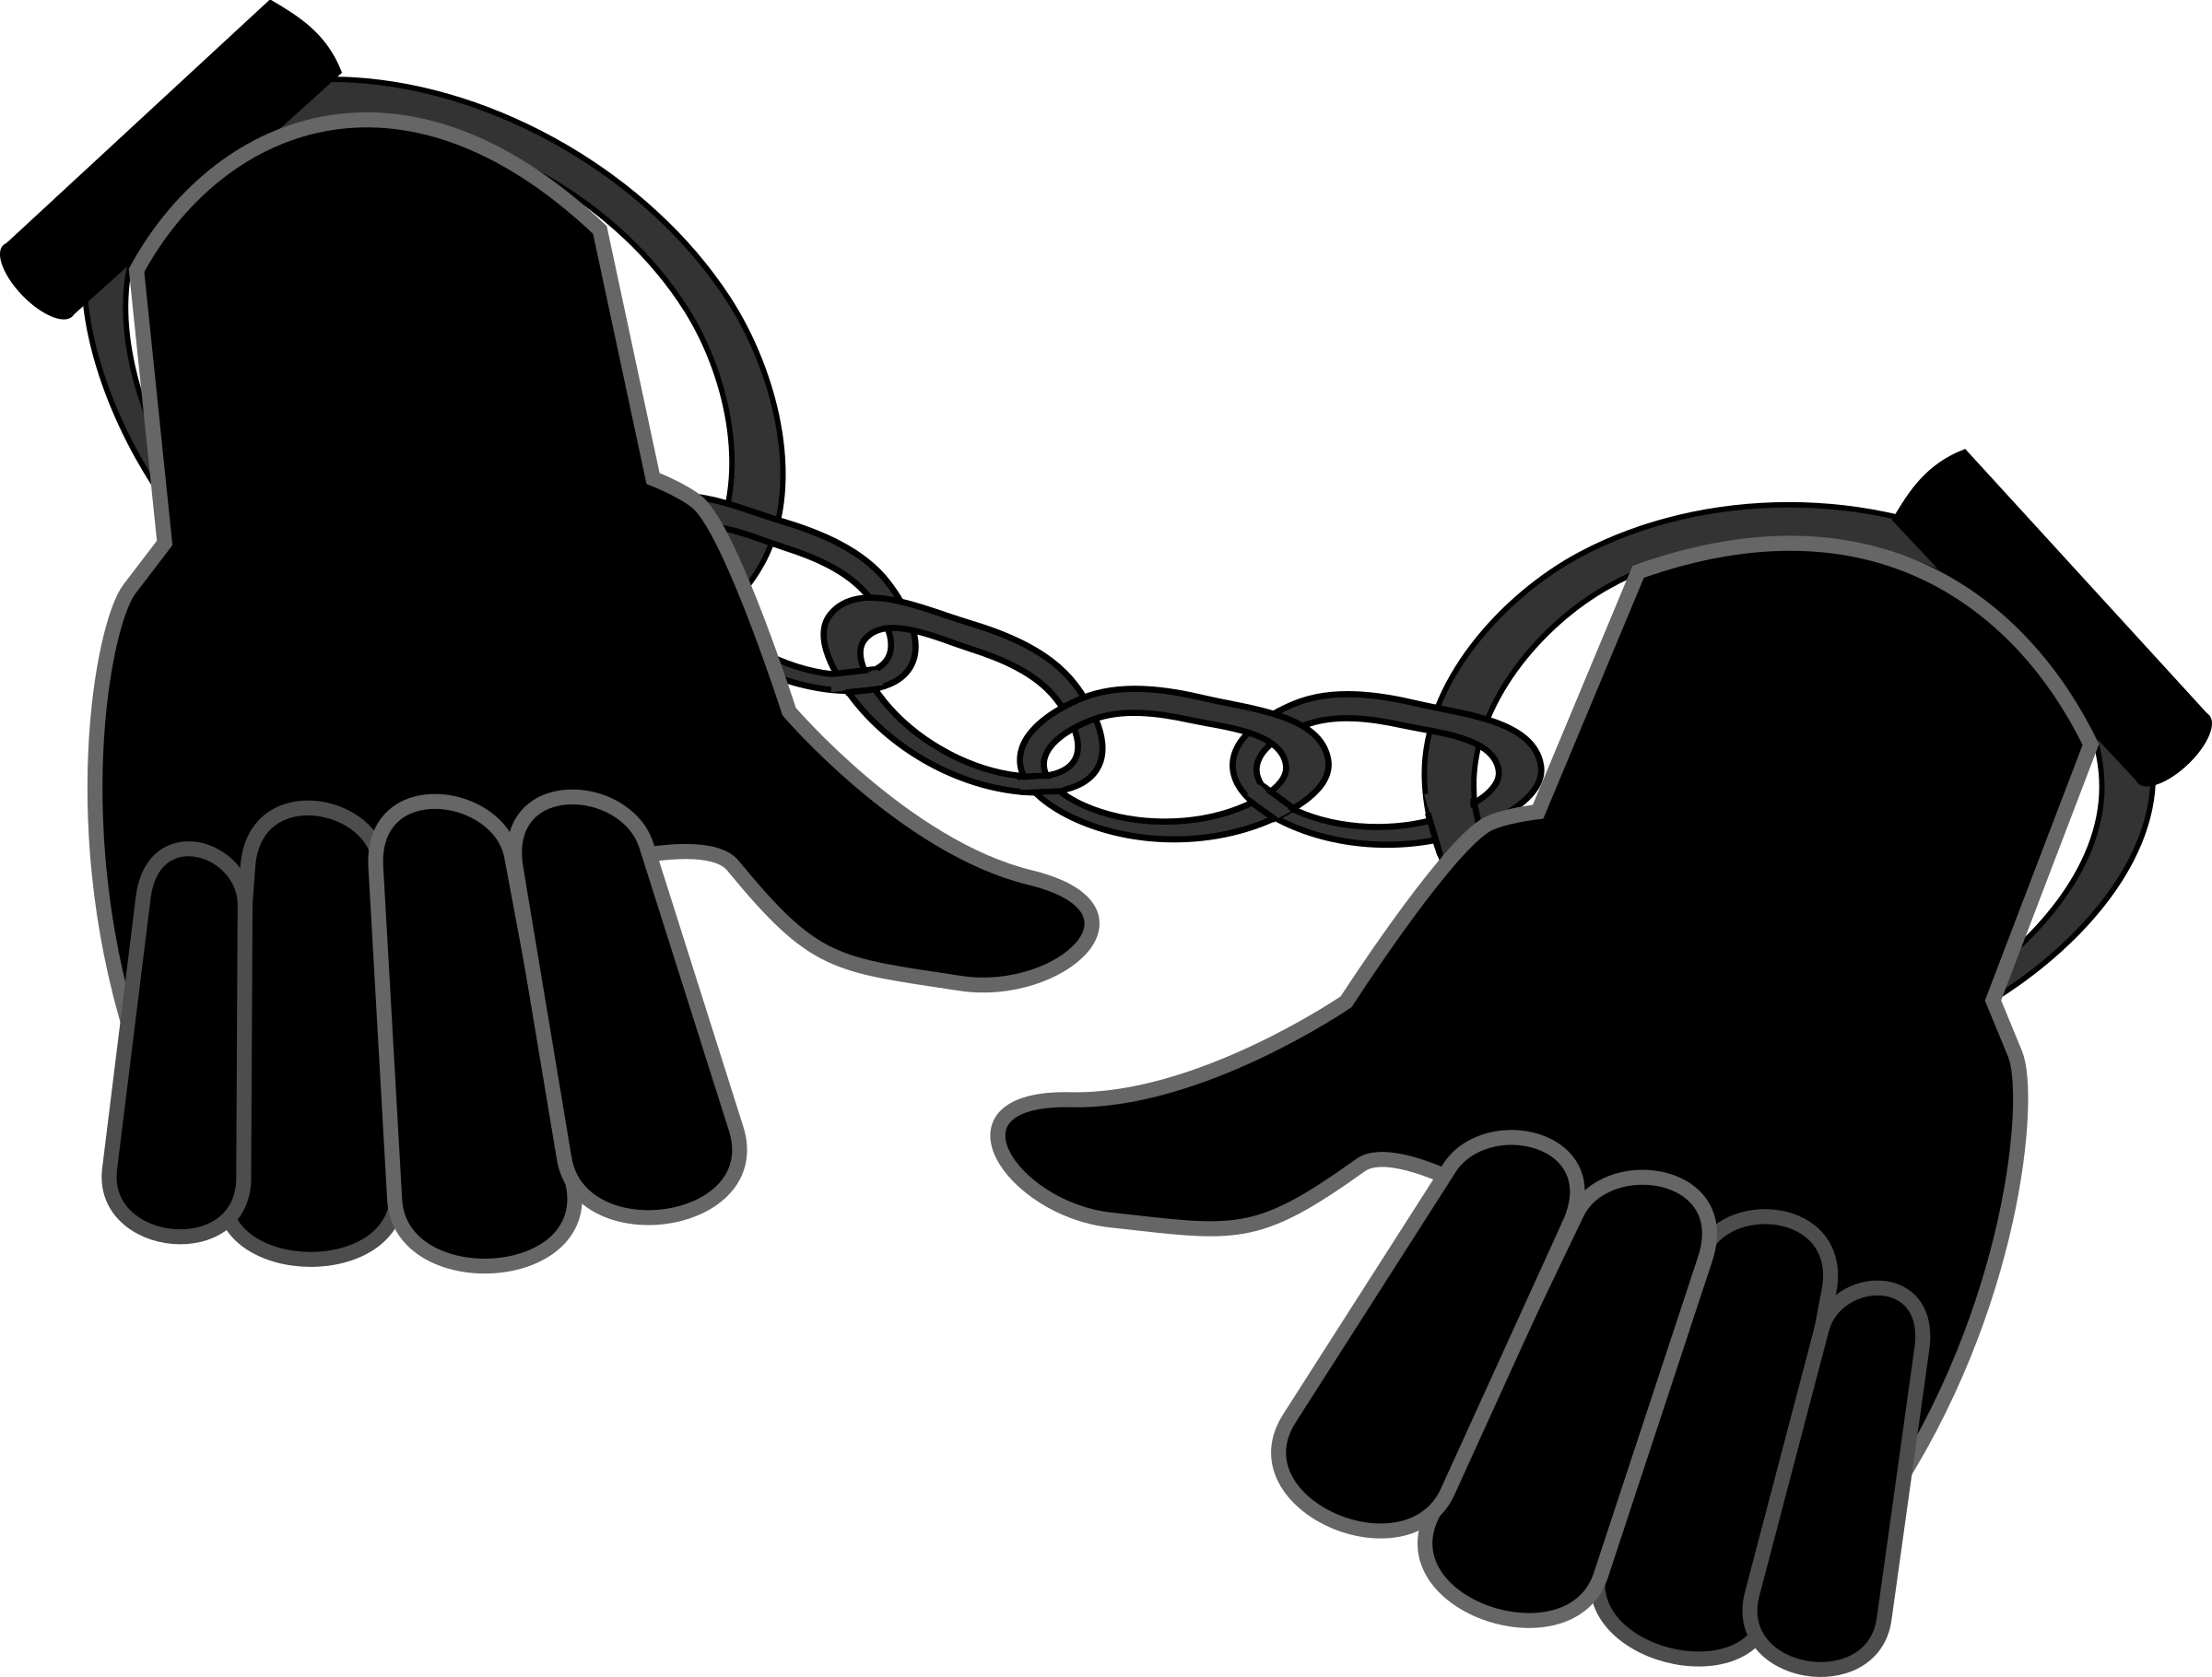 Hands in Handcuffs Clipart (7